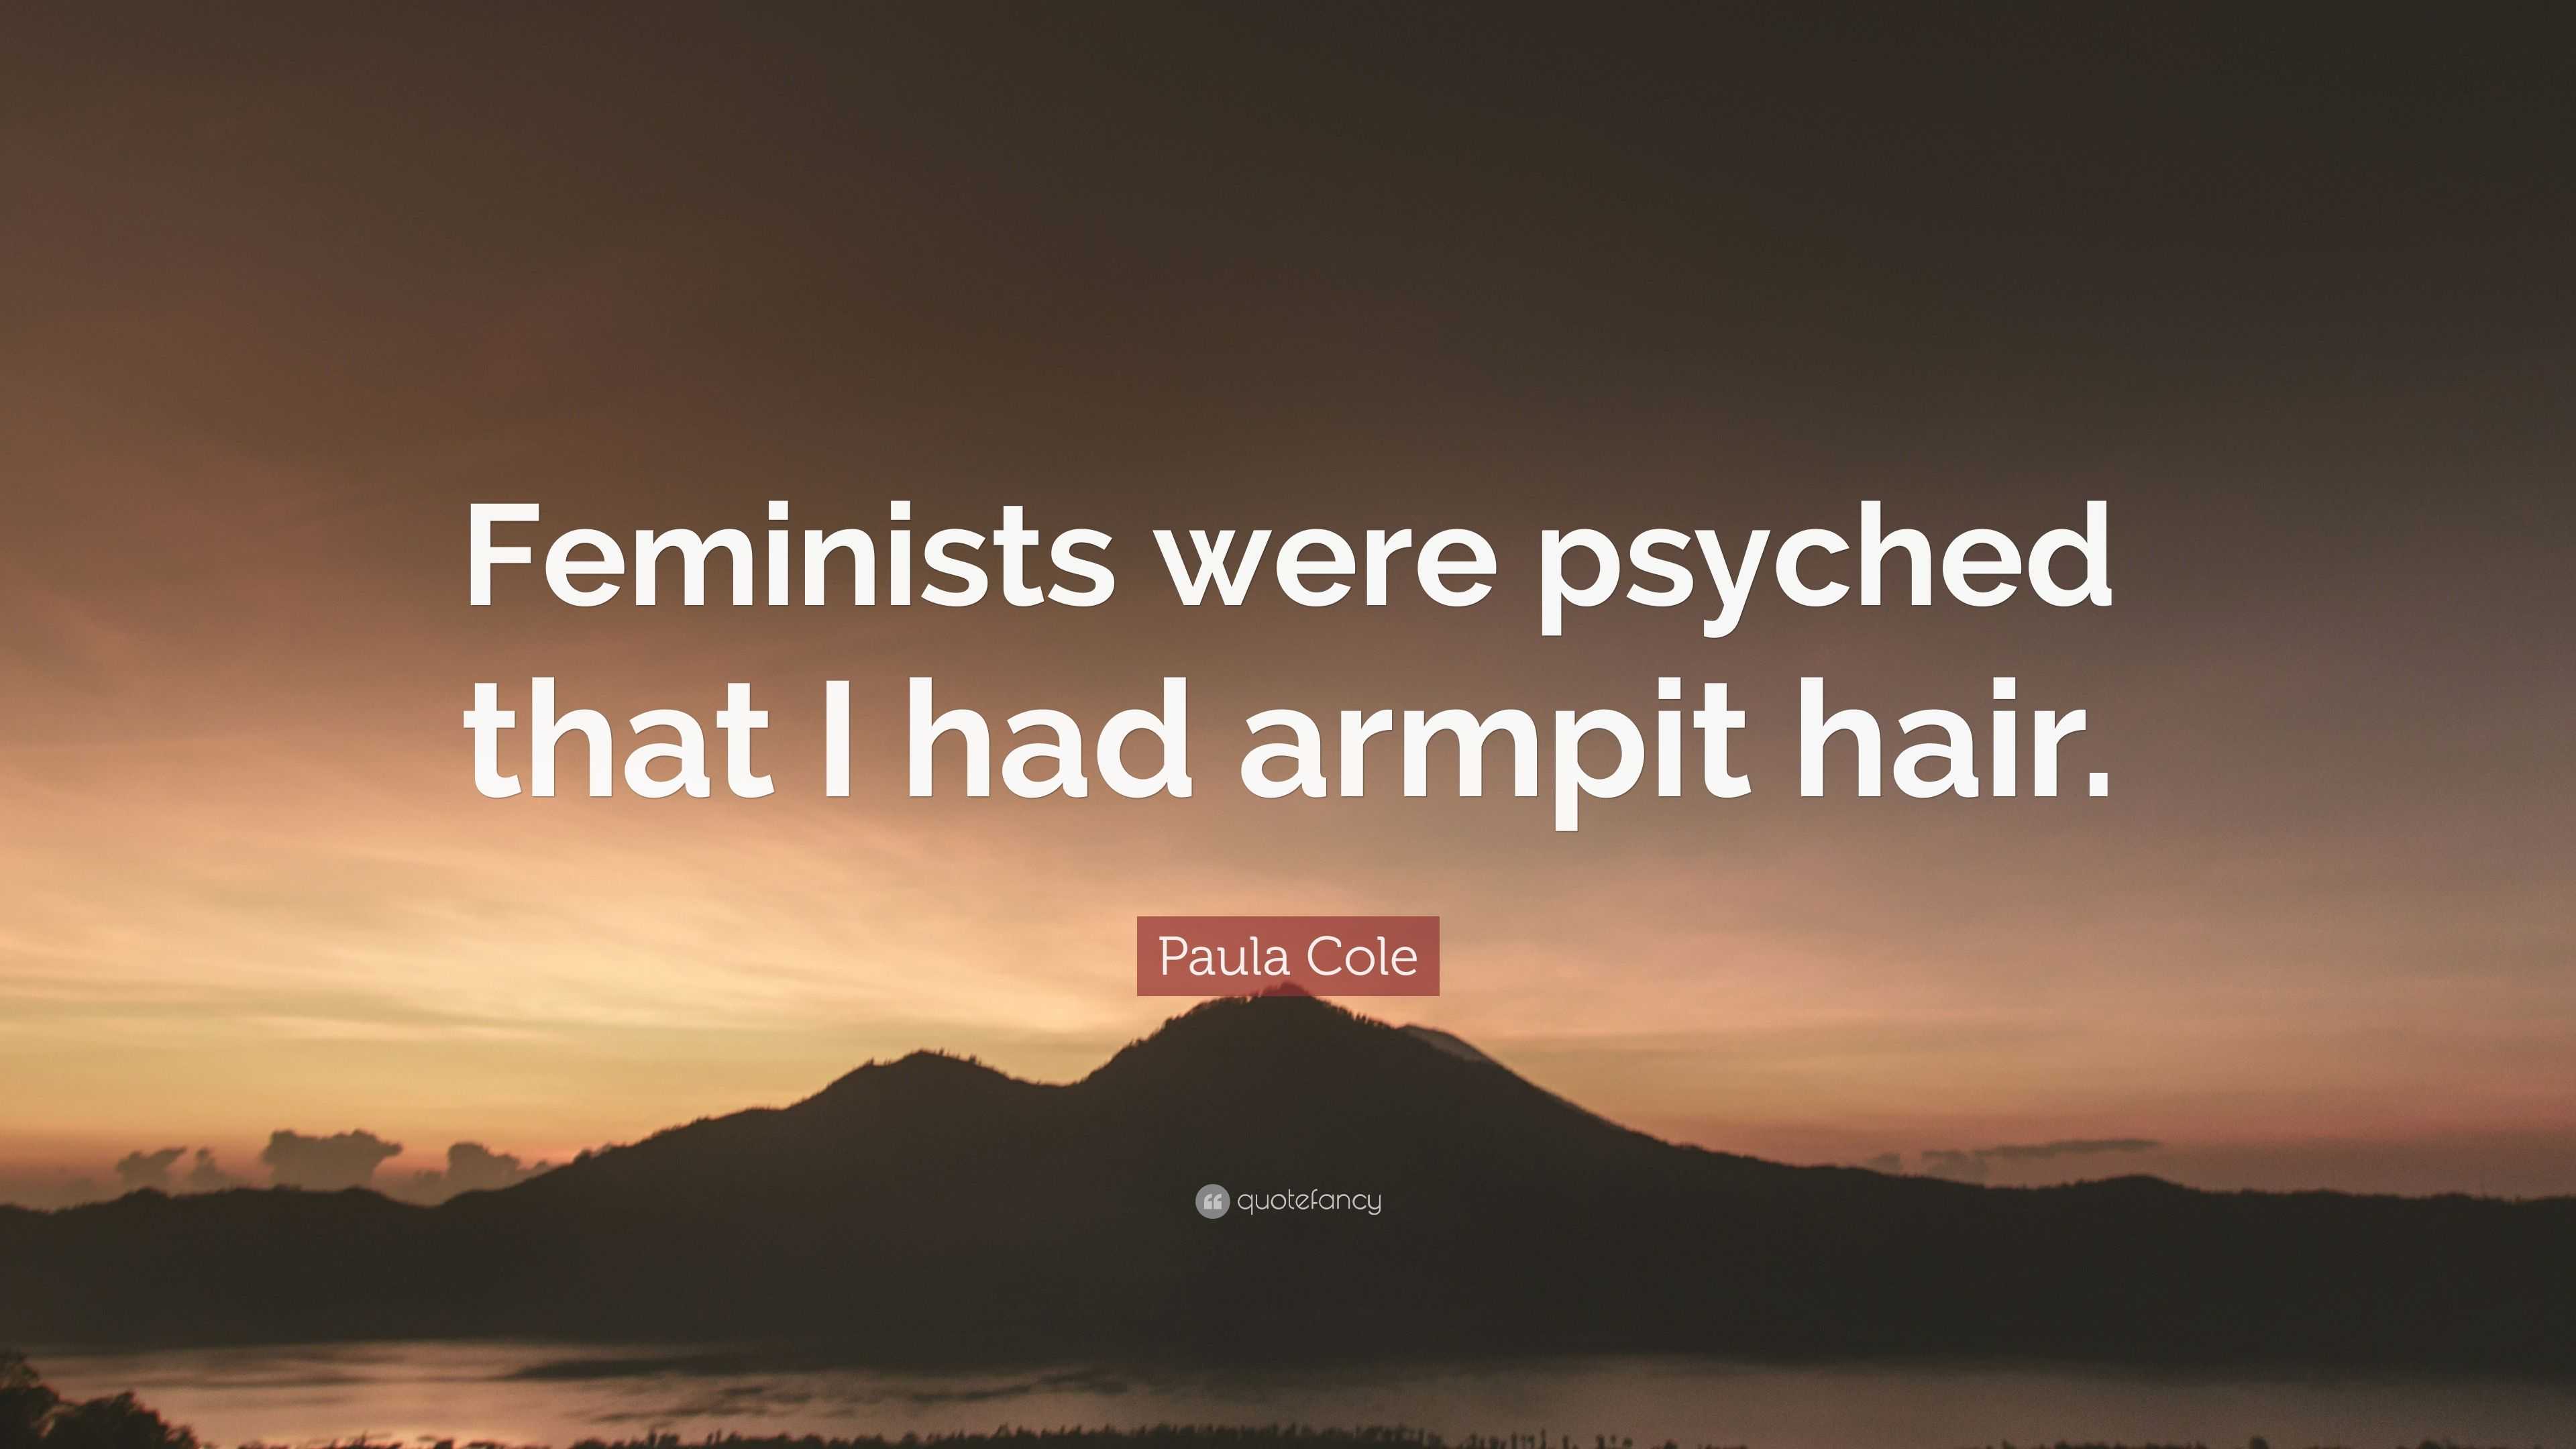 Paula Cole Quote: "Feminists were psyched that I had ...